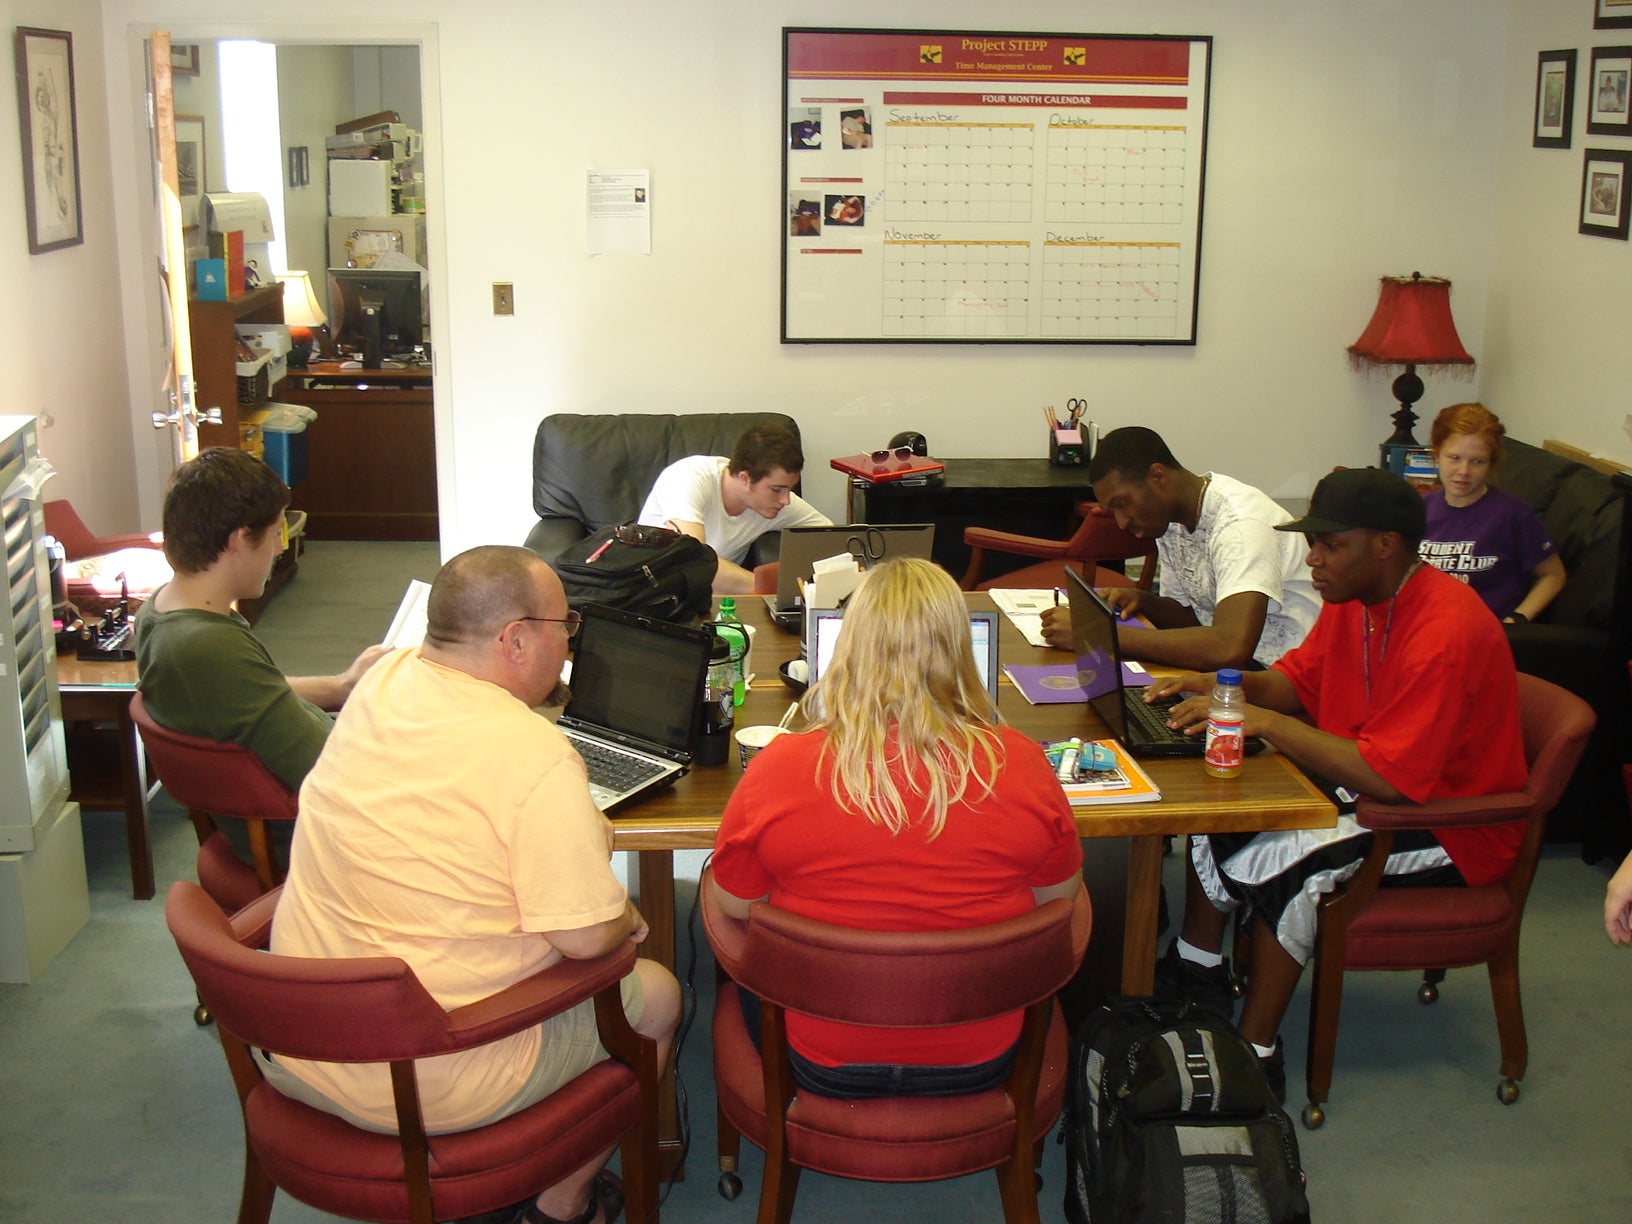 tutor and students sitting around a table working in the old STEPP office